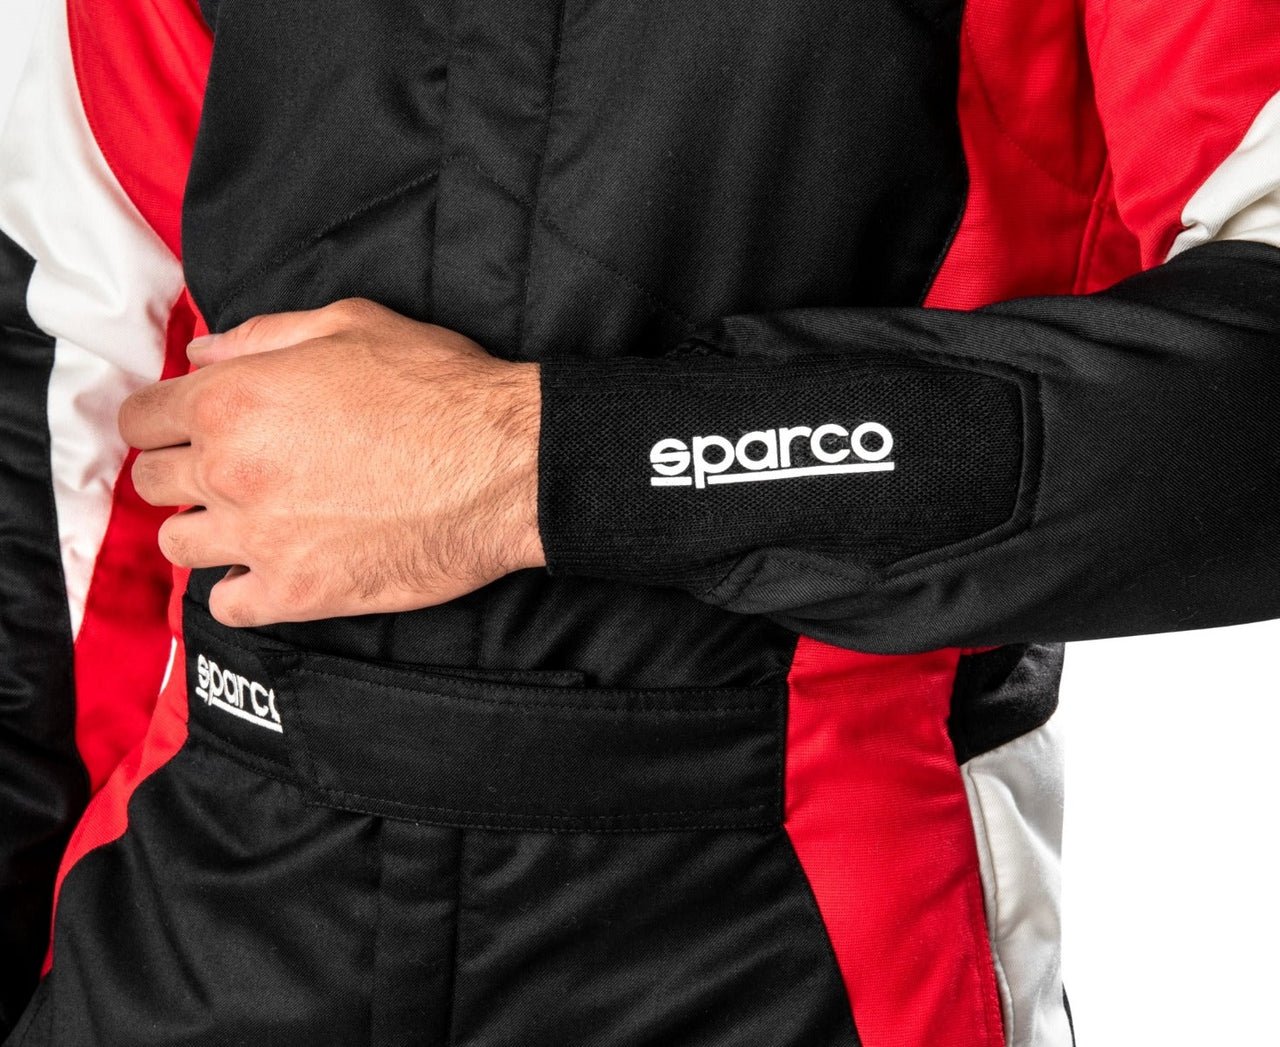  SPARCO COMPETITION RACE SUIT  BLACK / RED CLOSEUP BIGGEST DISCOUNTS FOR THE LOWEST PRICES AND BEST DEAL WITH REVIEWS